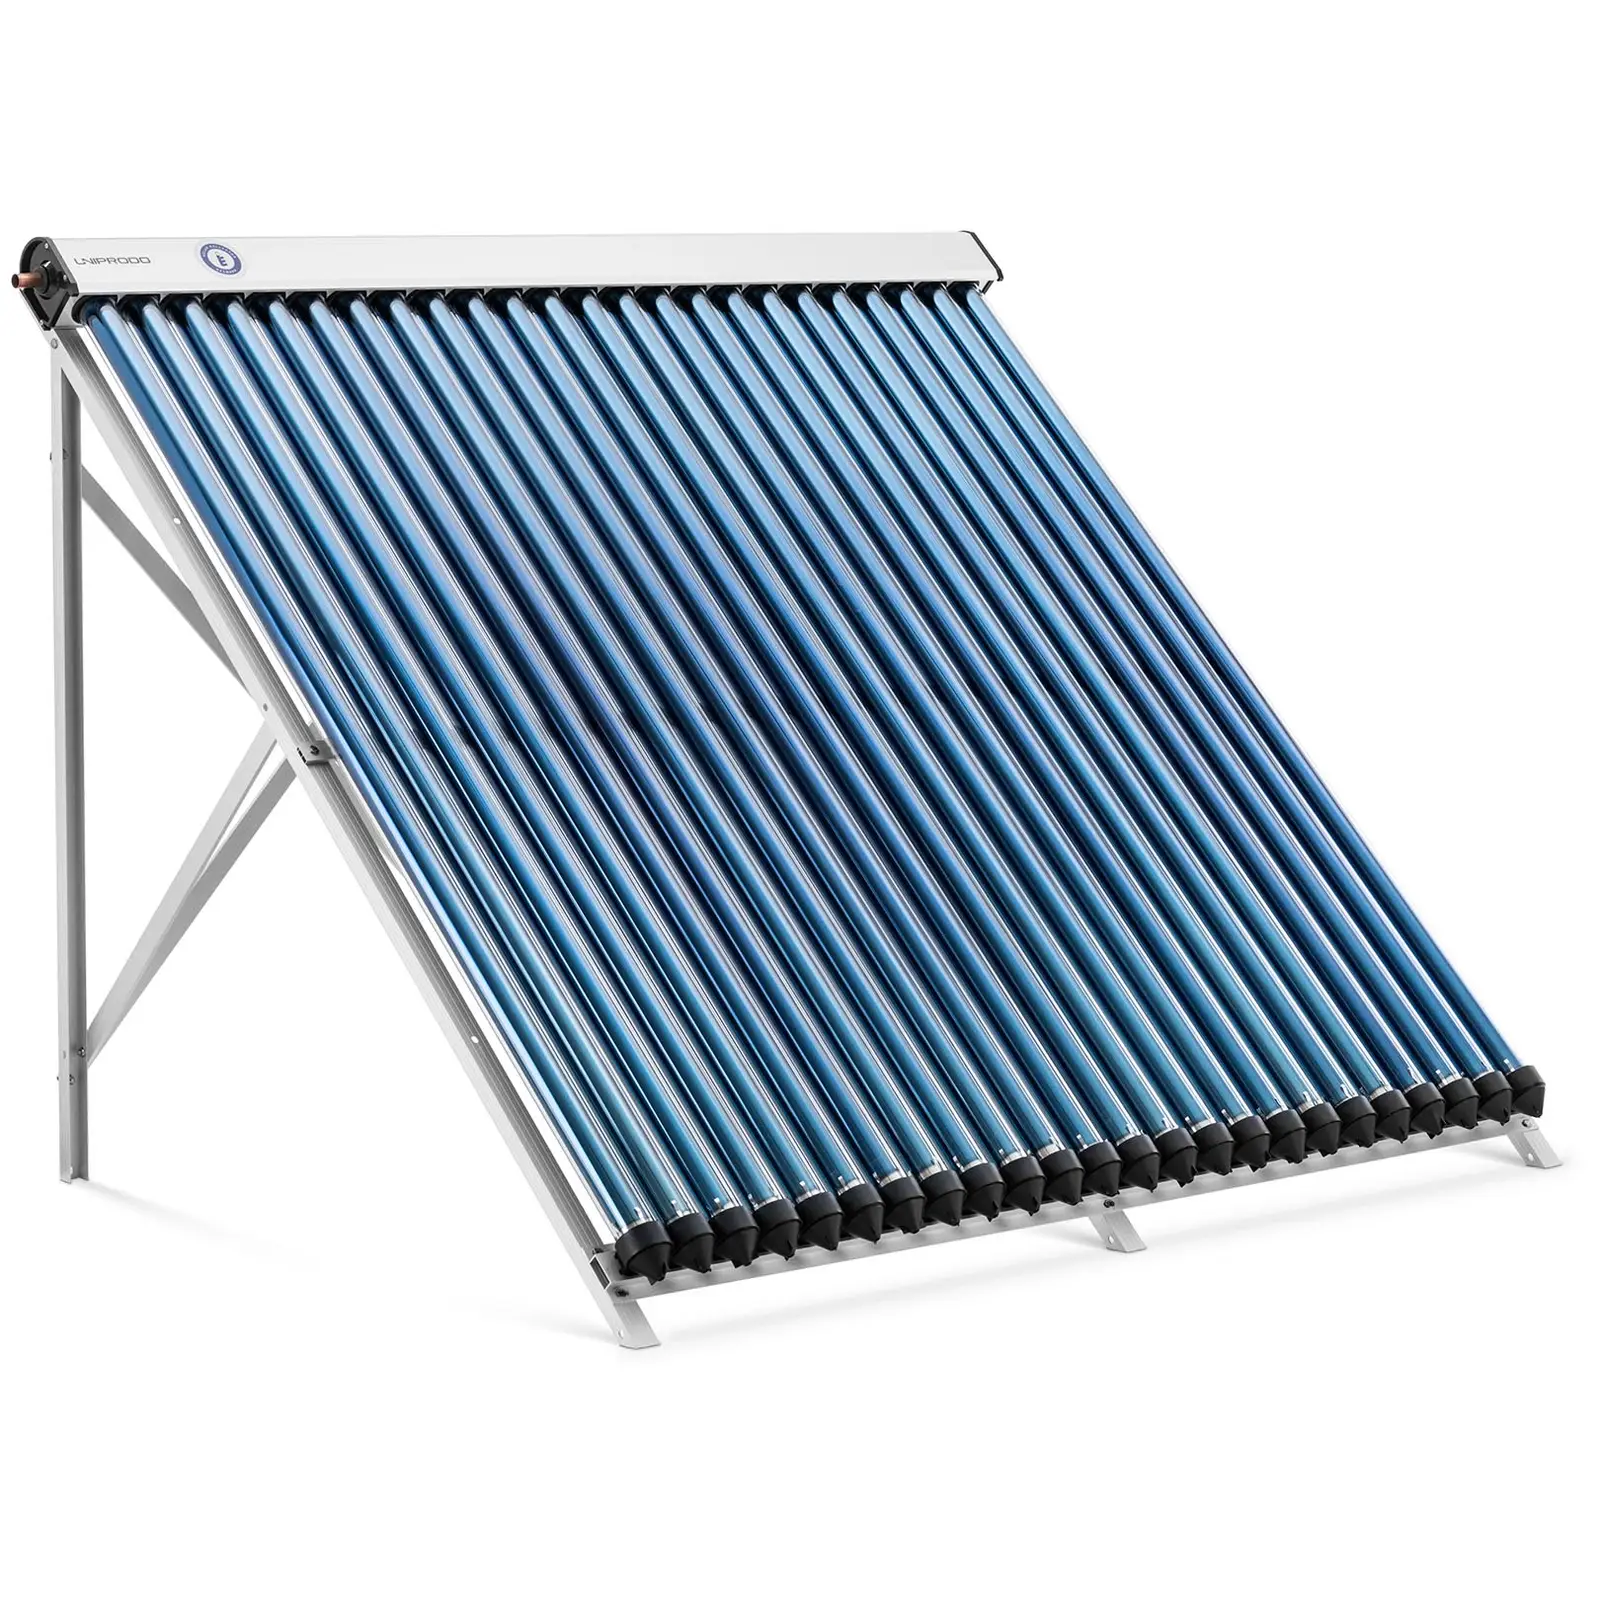 Evacuated Solar Tube Collector - Solar thermal - 24 Tubes - 200 - 240 L - 1.92 m² - -45 - 90 °C